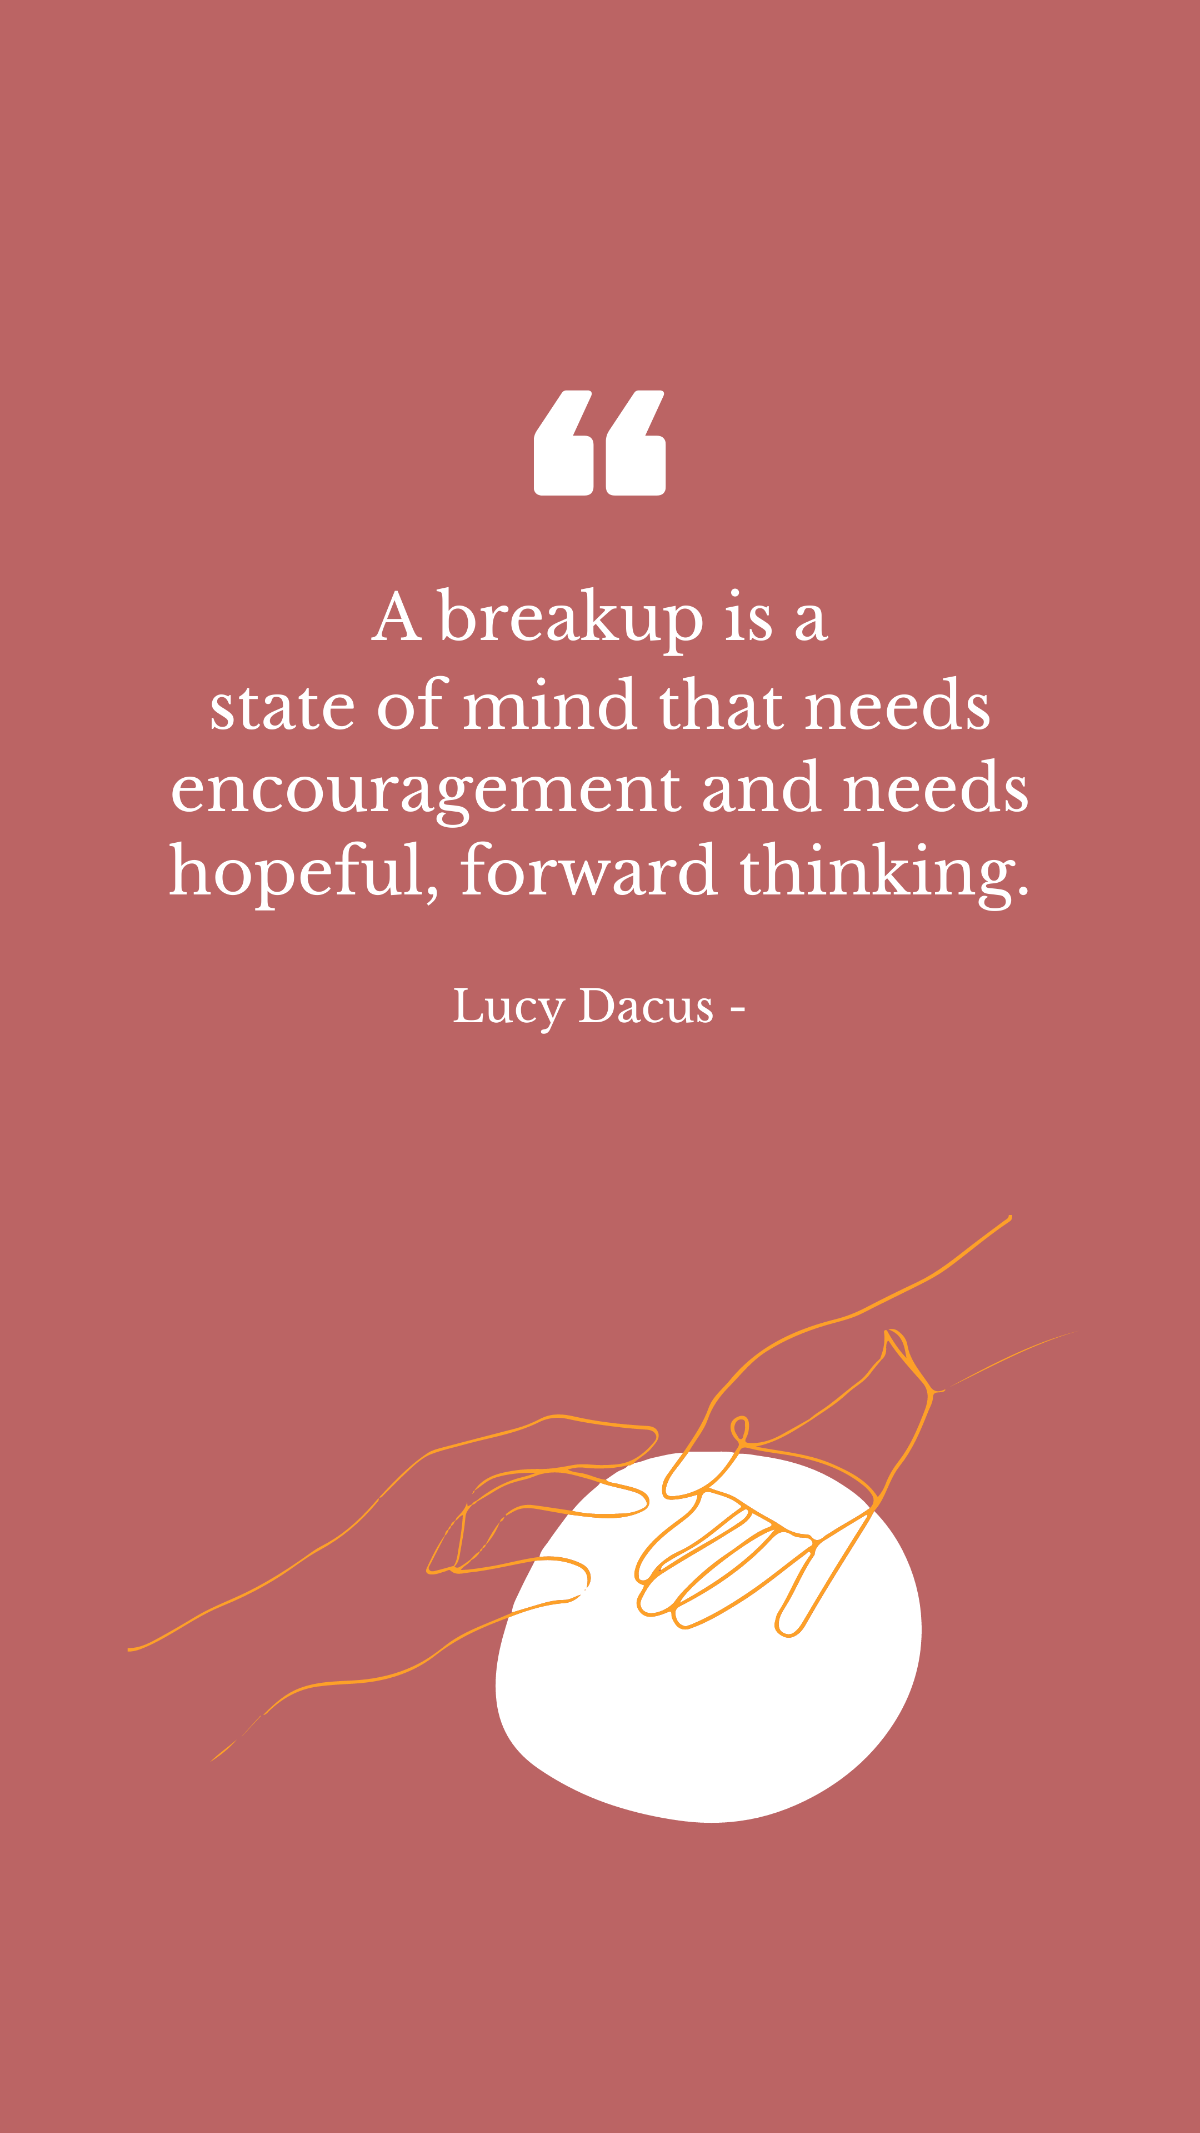 Lucy Dacus - A breakup is a state of mind that needs encouragement and needs hopeful, forward thinking. Template